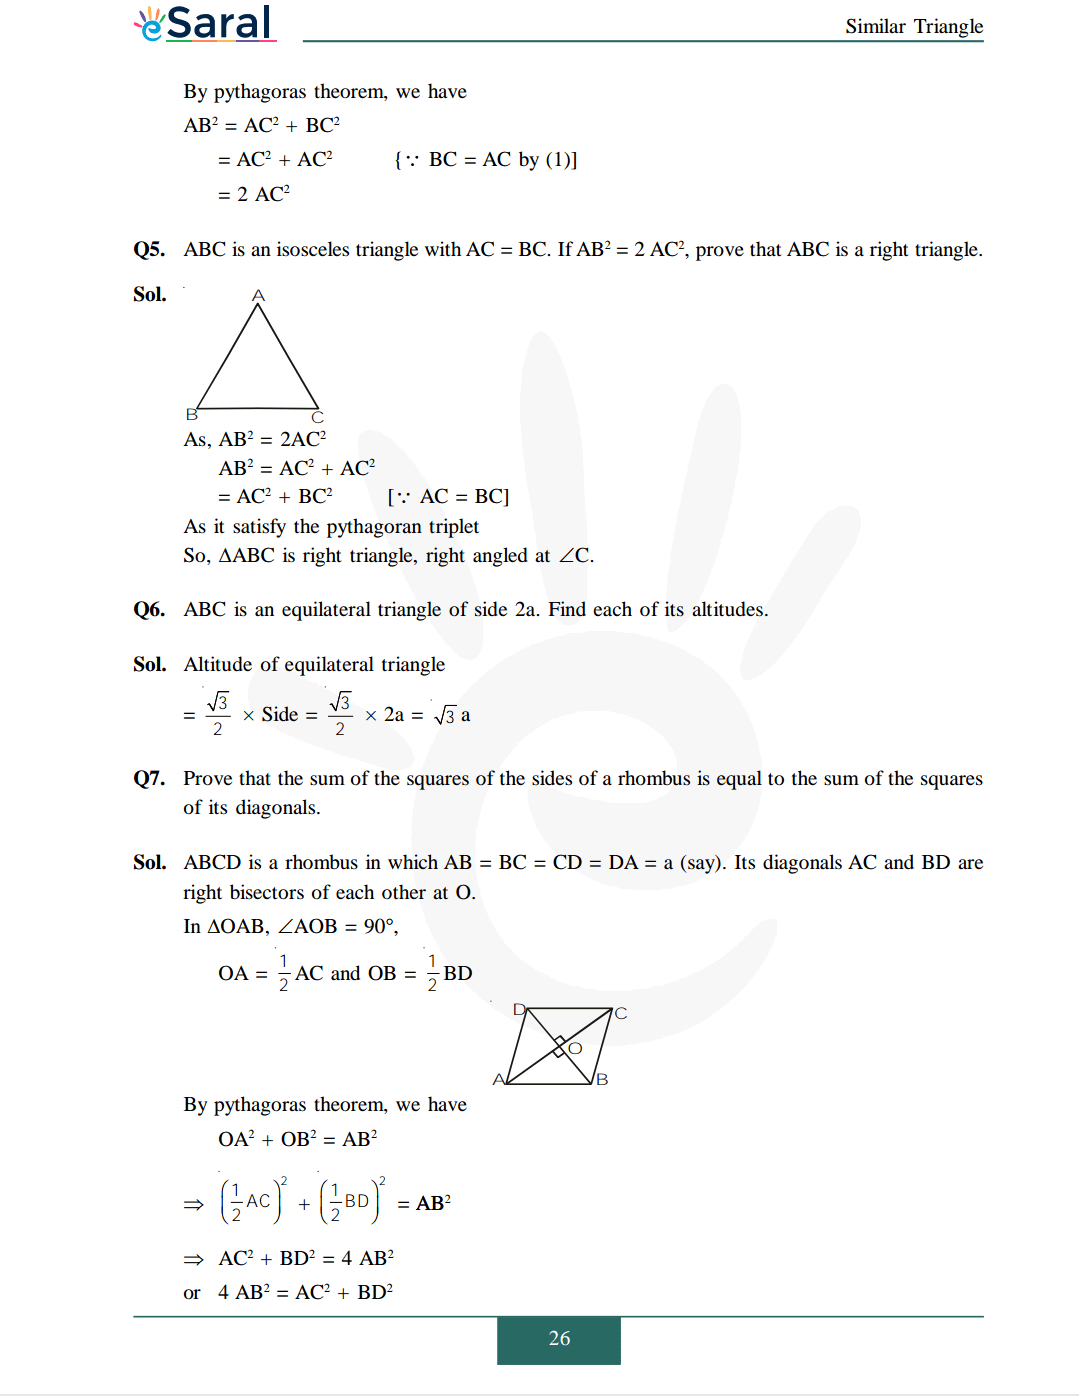 Class 10 Maths Chapter 6 exercise 6.5 solutions Image 3